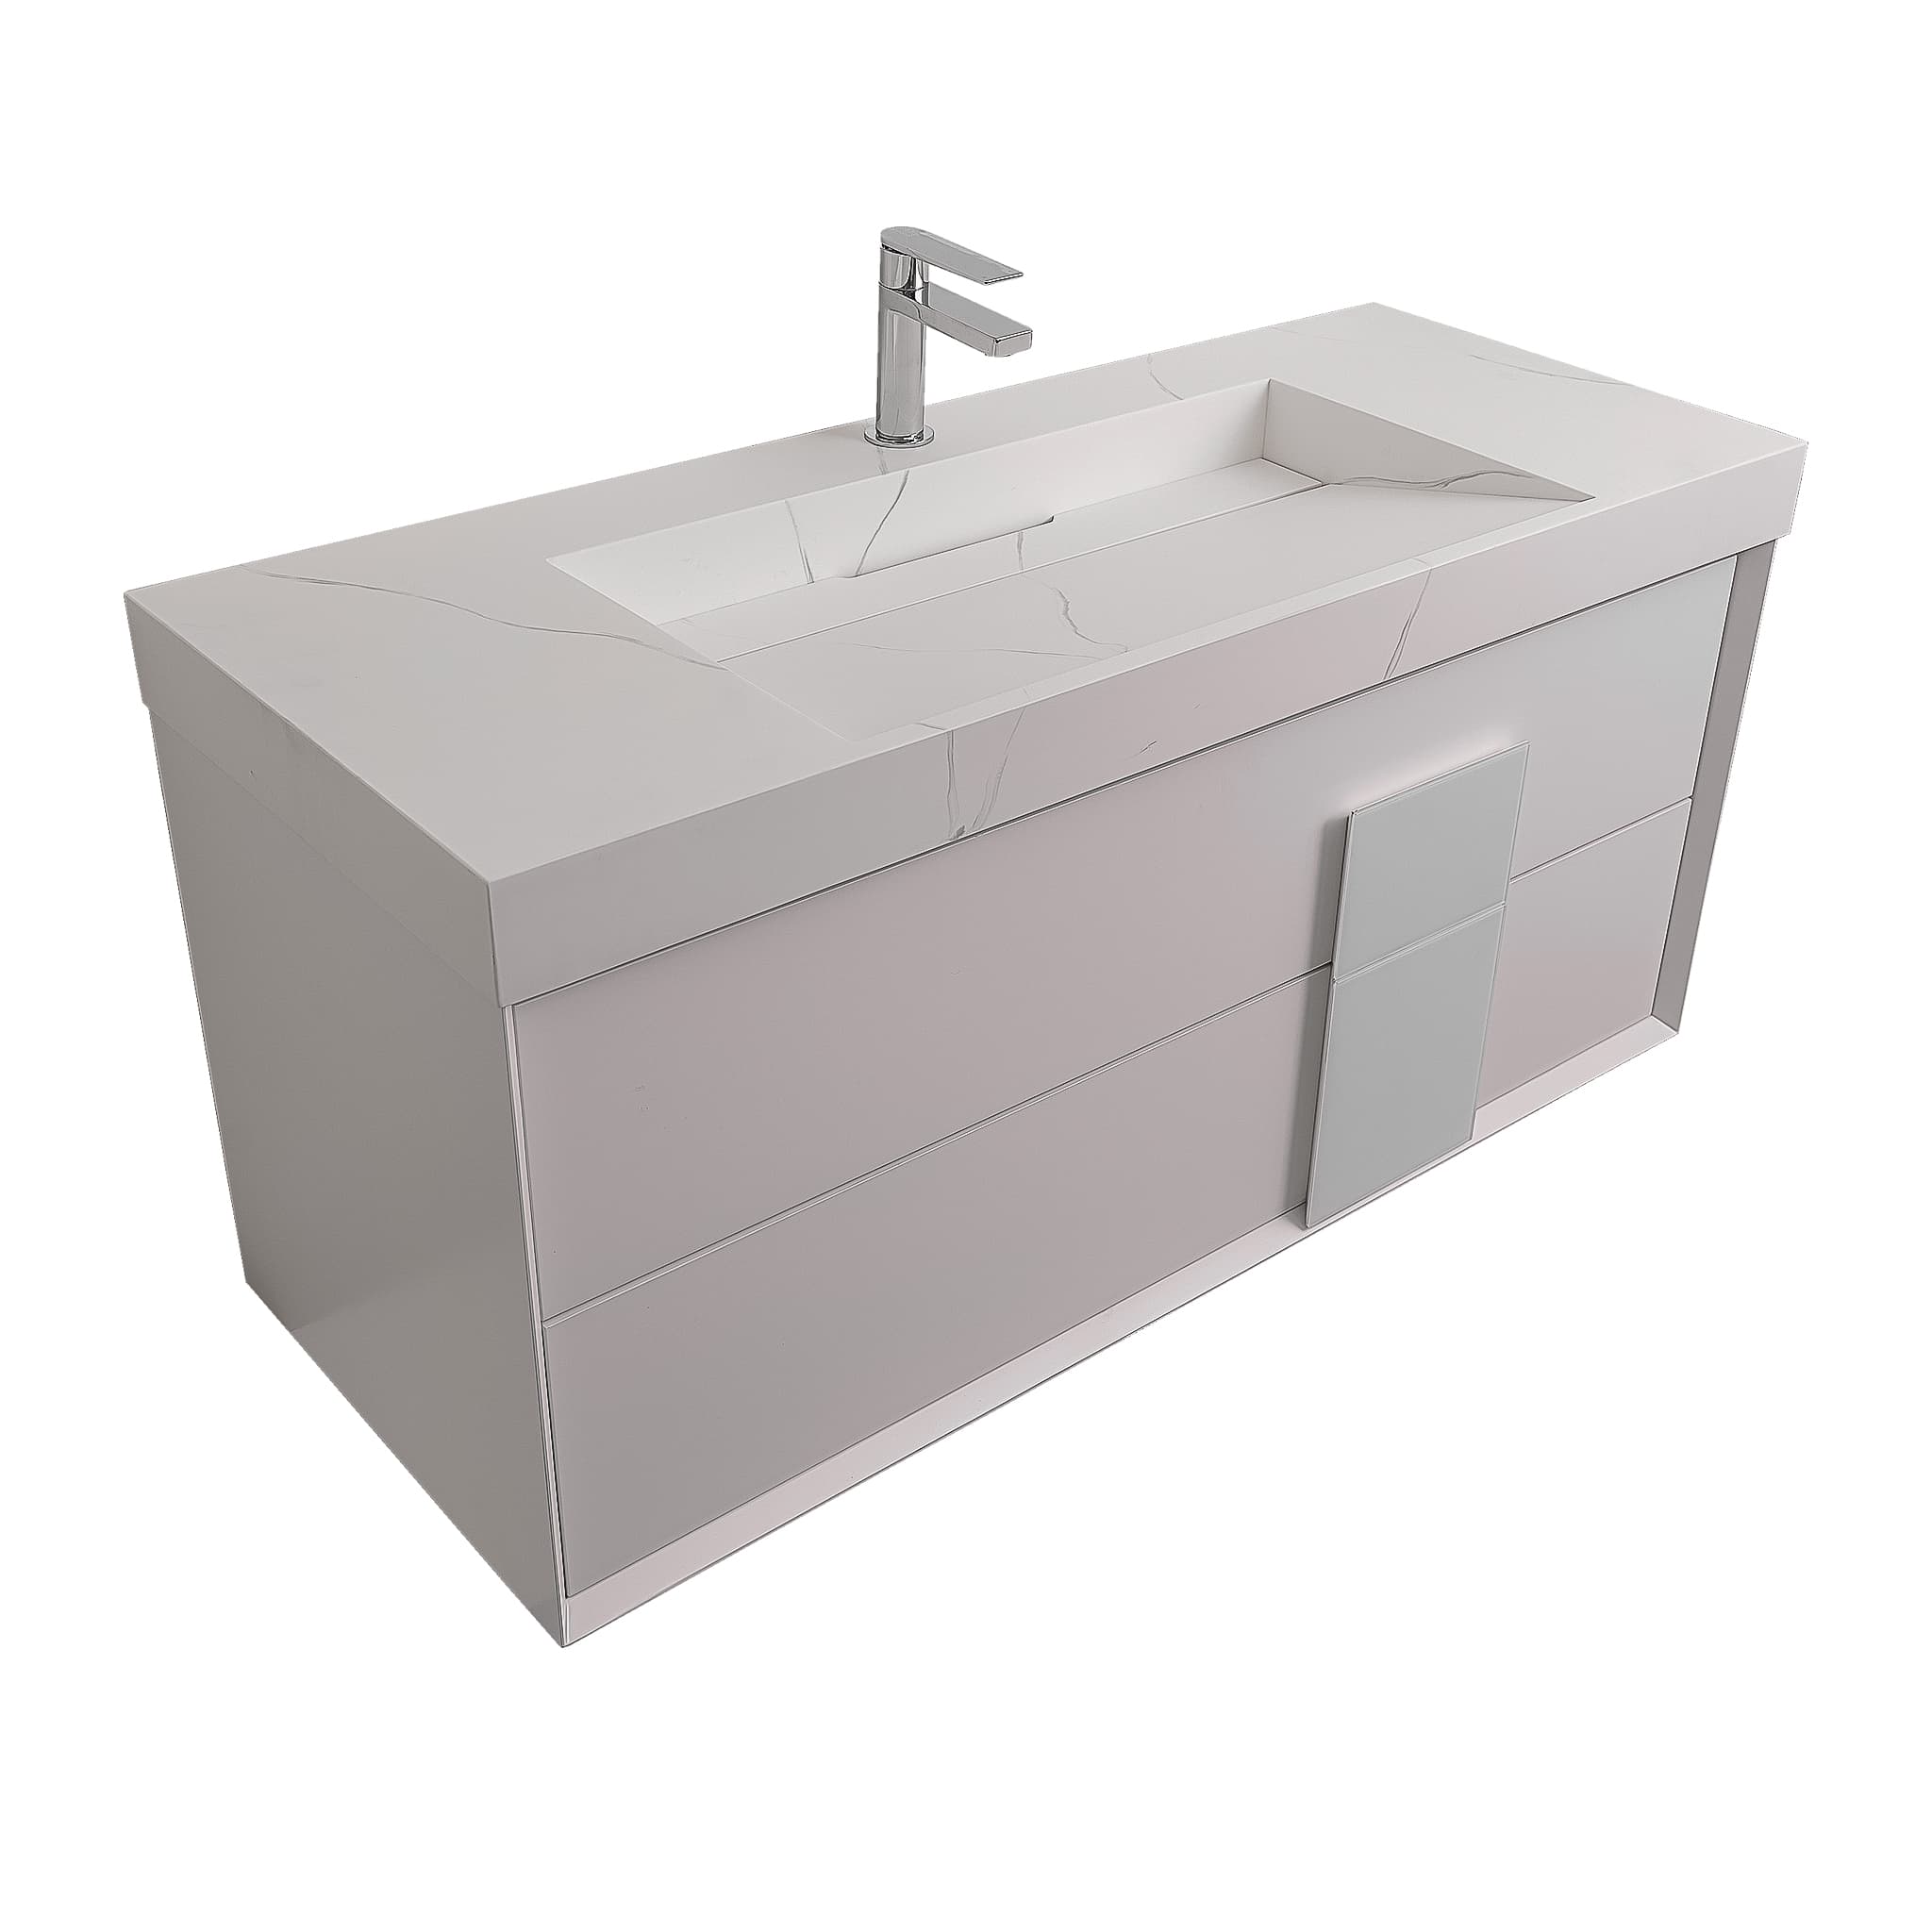 Piazza 47.5 Matte White With White Handle Cabinet, Solid Surface Matte White Carrara Infinity Sink, Wall Mounted Modern Vanity Set